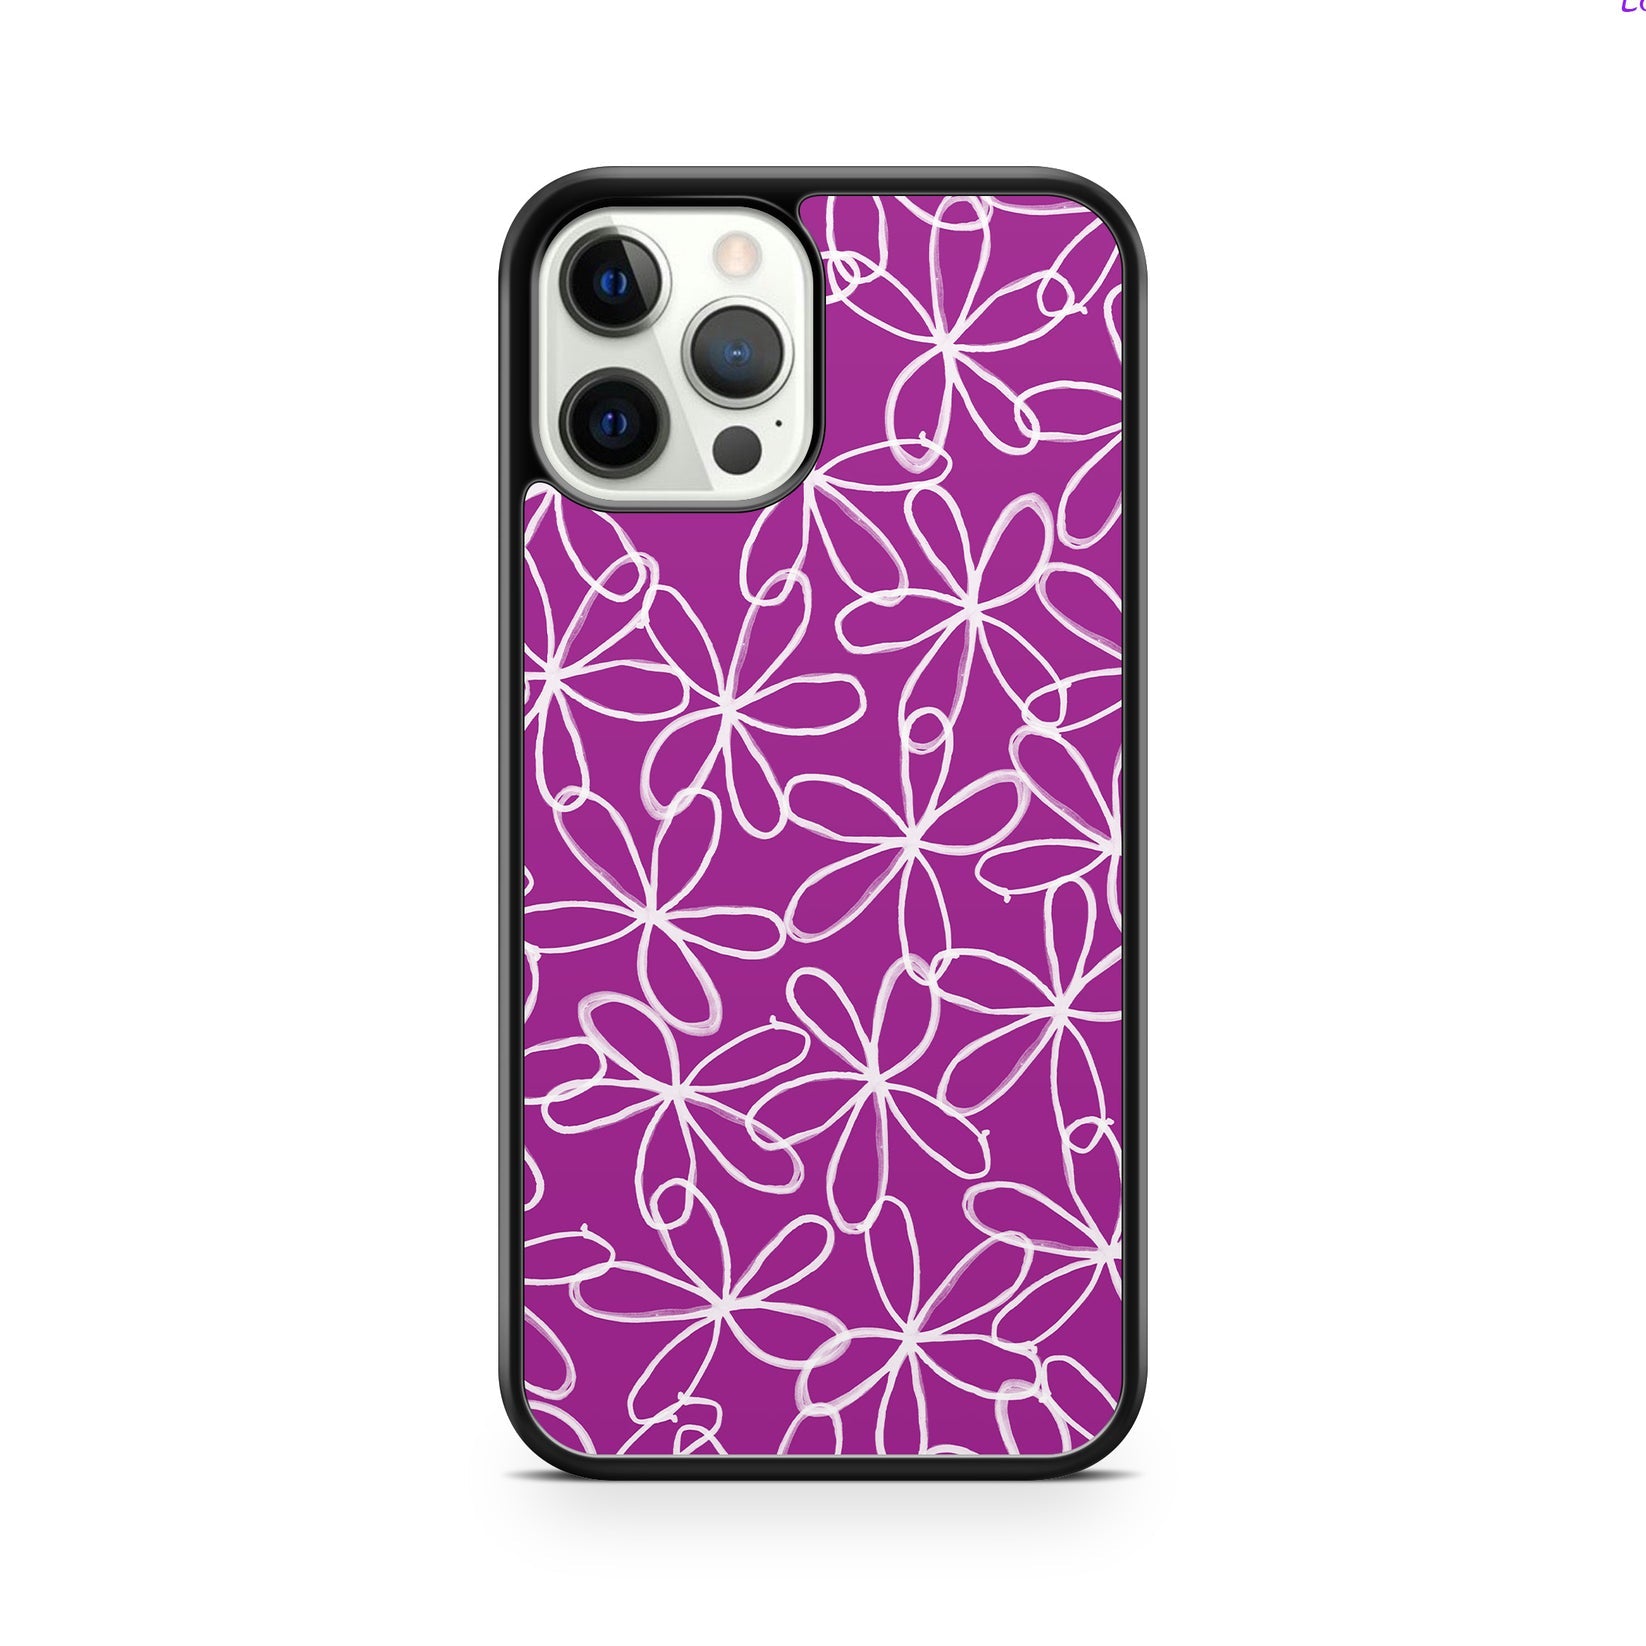 Purple and white doodle daisy print phone case